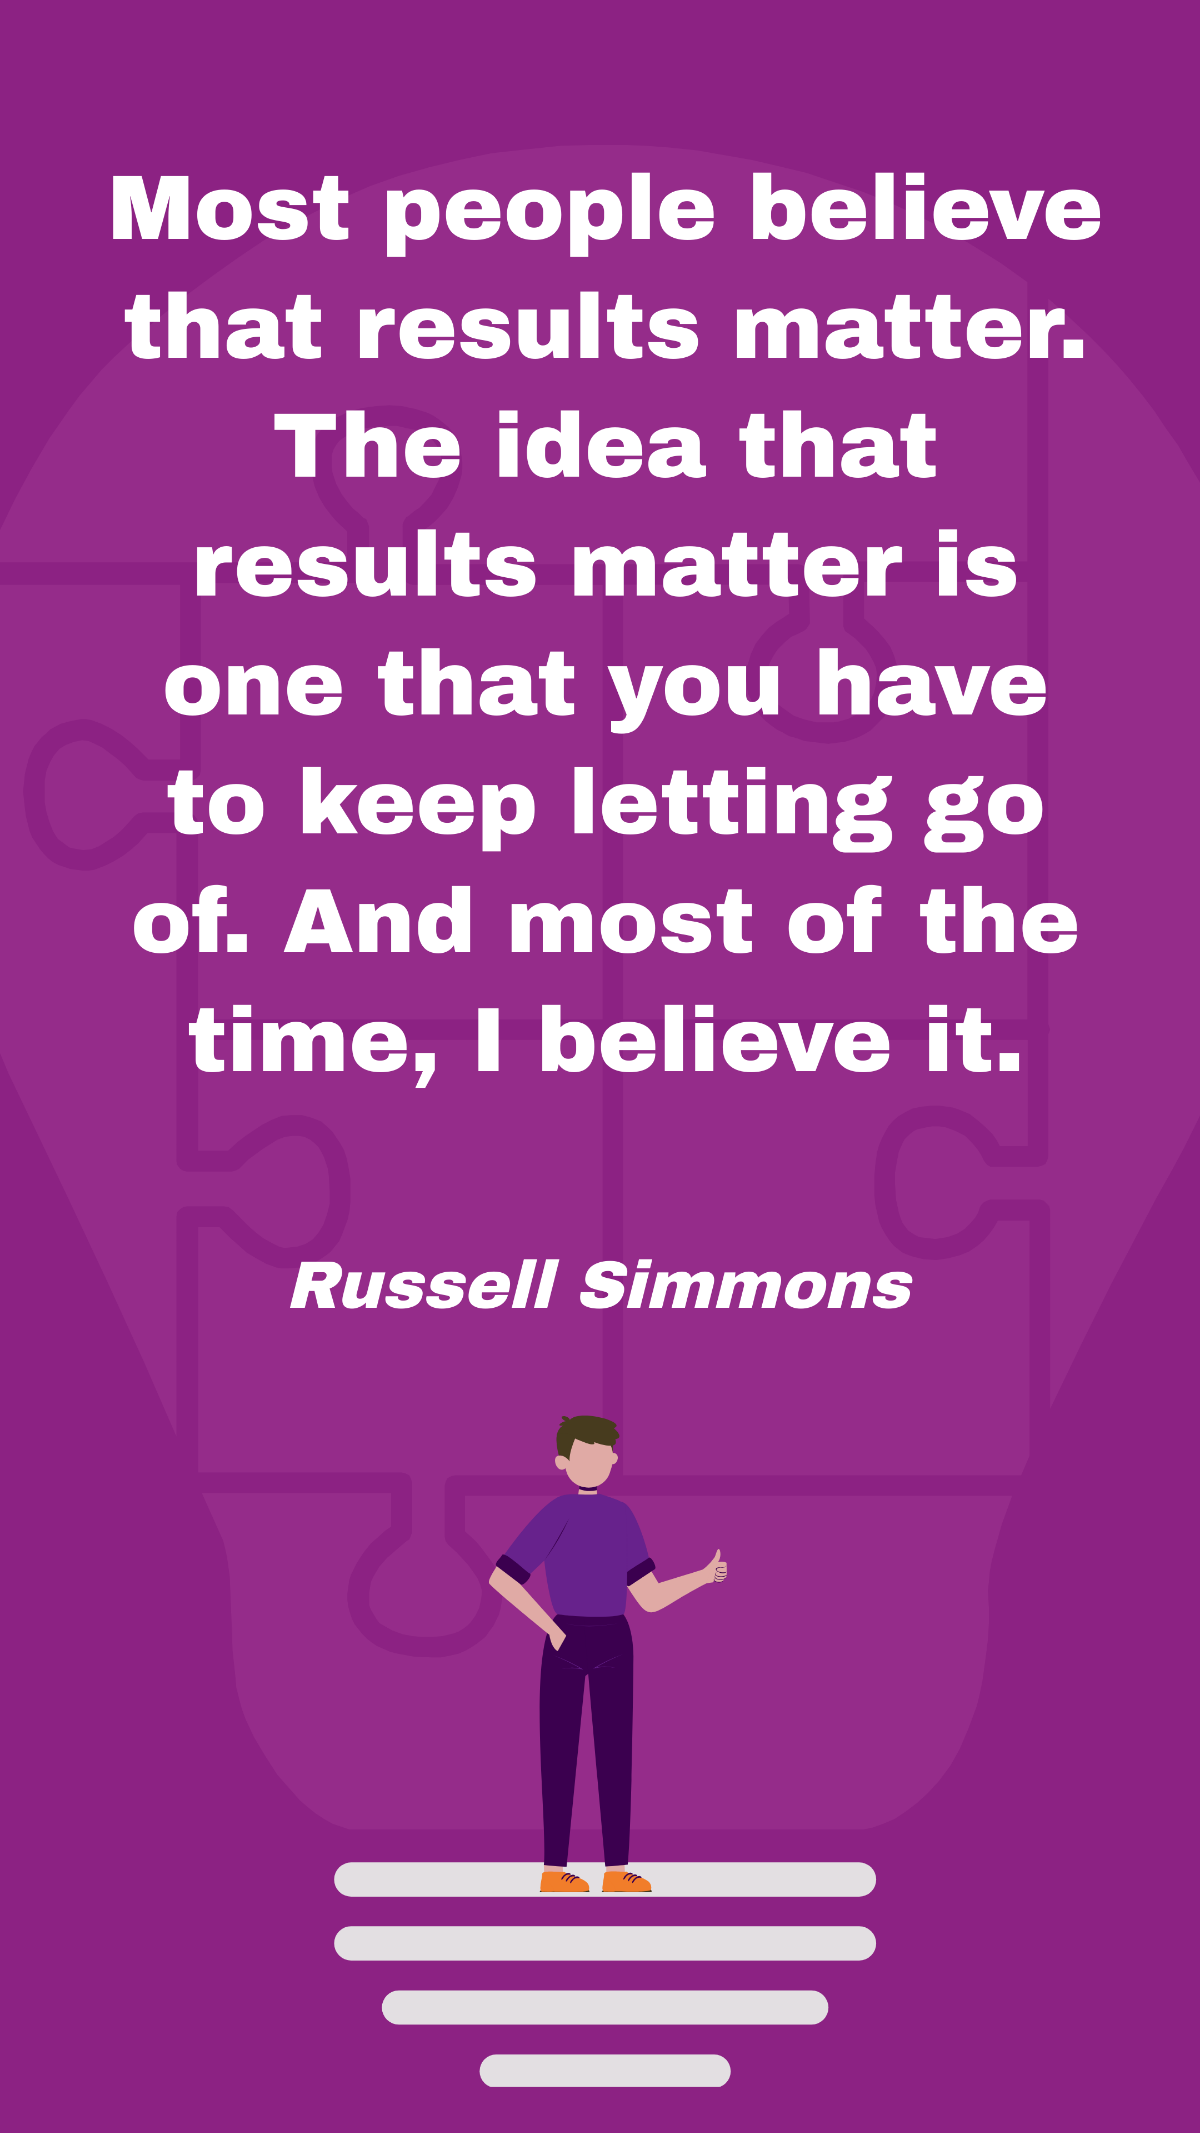 Free Russell Simmons - Most people believe that results matter. The idea that results matter is one that you have to keep letting go of. And most of the time, I believe it. Template